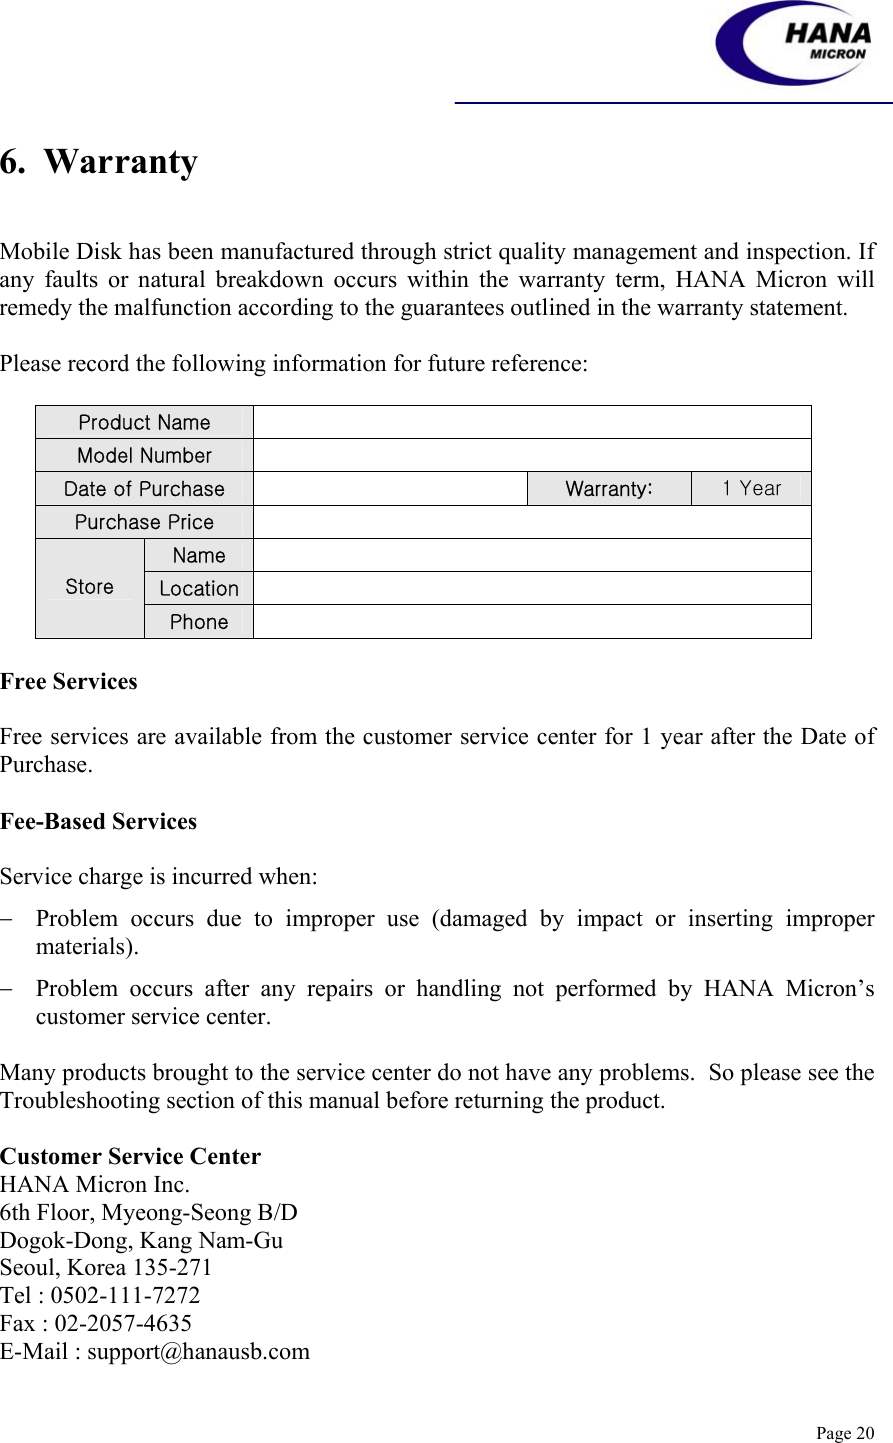    Page 20 6.  Warranty   Mobile Disk has been manufactured through strict quality management and inspection. If any faults or natural breakdown occurs within the warranty term, HANA Micron will remedy the malfunction according to the guarantees outlined in the warranty statement.  Please record the following information for future reference:  Product Name   Model Number   Date of Purchase   Warranty:  1 Year Purchase Price   Name   Location   Store Phone    Free Services  Free services are available from the customer service center for 1 year after the Date of Purchase.  Fee-Based Services  Service charge is incurred when: − Problem occurs due to improper use (damaged by impact or inserting improper materials). − Problem occurs after any repairs or handling not performed by HANA Micron’s customer service center.  Many products brought to the service center do not have any problems.  So please see the Troubleshooting section of this manual before returning the product.  Customer Service Center HANA Micron Inc. 6th Floor, Myeong-Seong B/D Dogok-Dong, Kang Nam-Gu Seoul, Korea 135-271 Tel : 0502-111-7272    Fax : 02-2057-4635 E-Mail : support@hanausb.com  